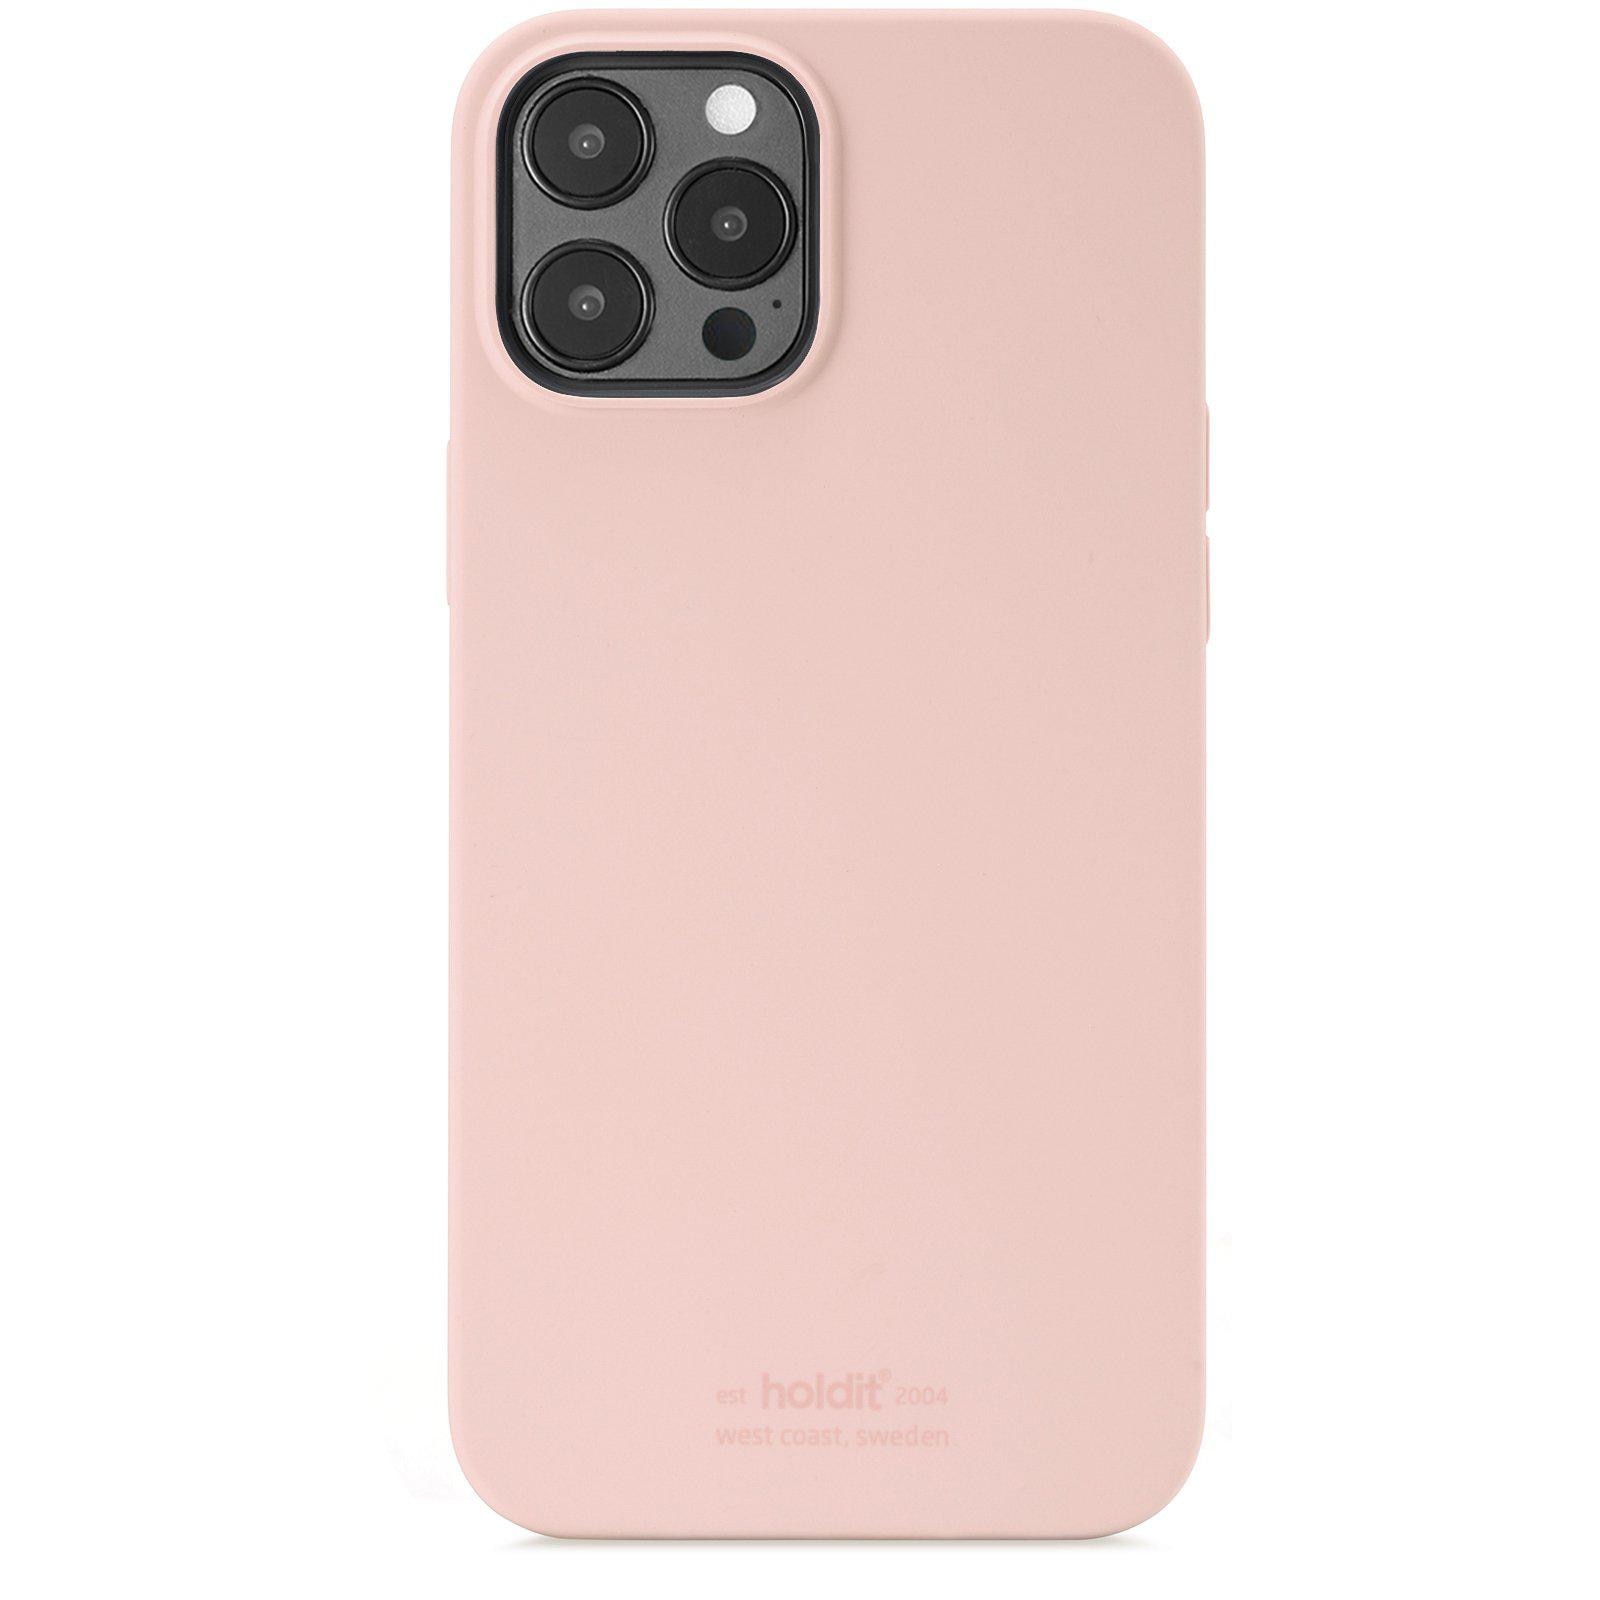 Coque en silicone iPhone 12 Pro Max, Blush Pink